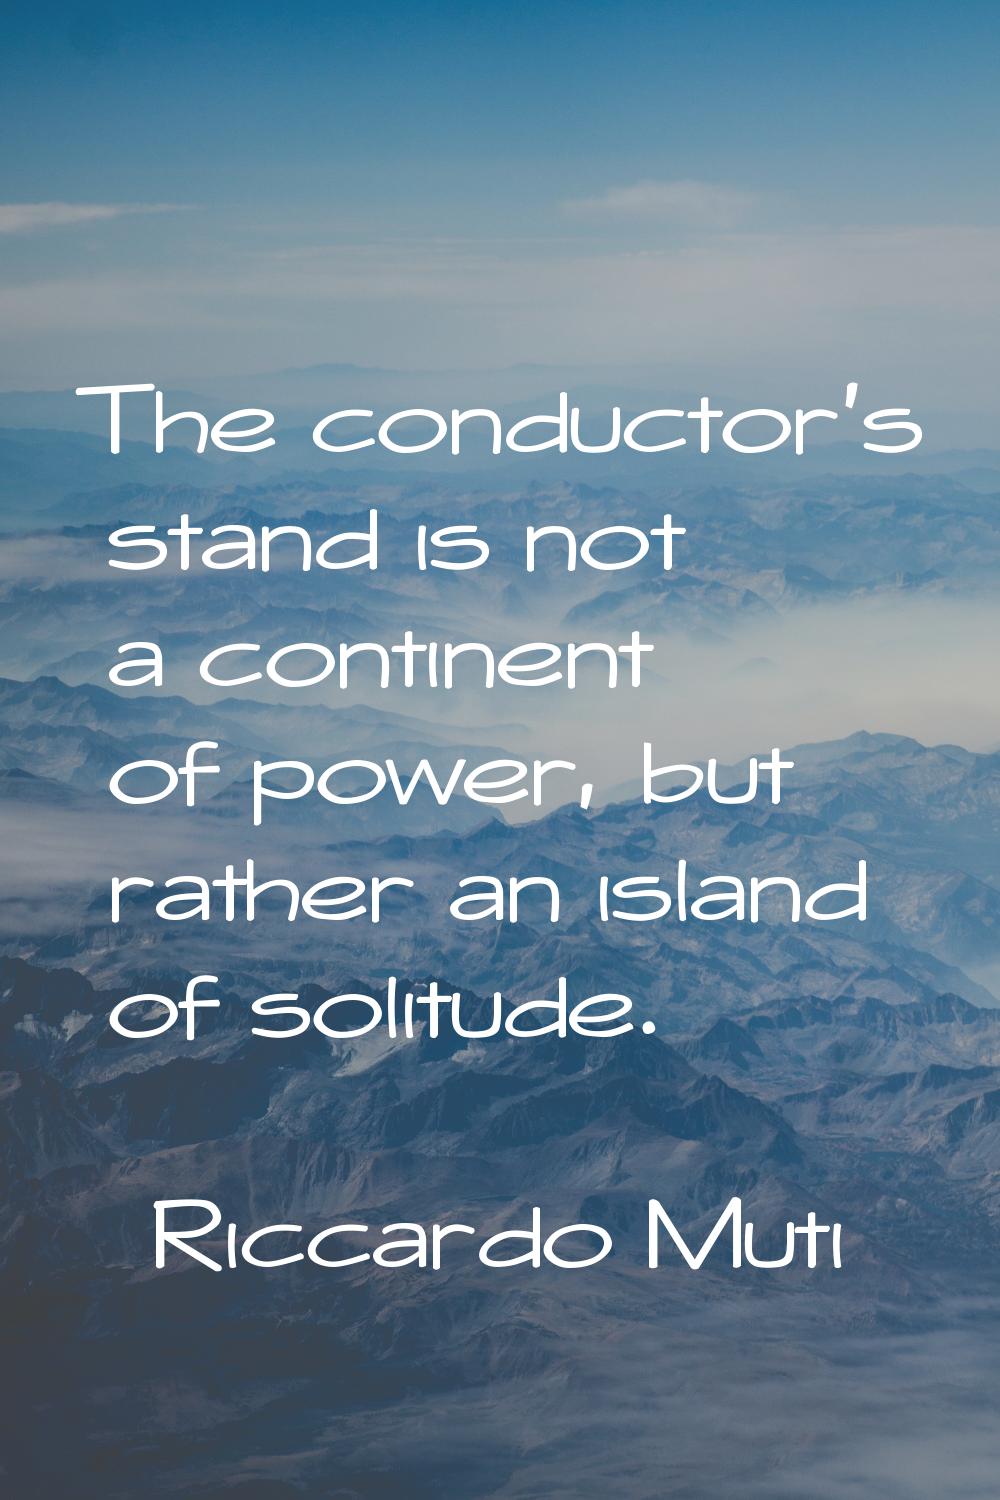 The conductor's stand is not a continent of power, but rather an island of solitude.